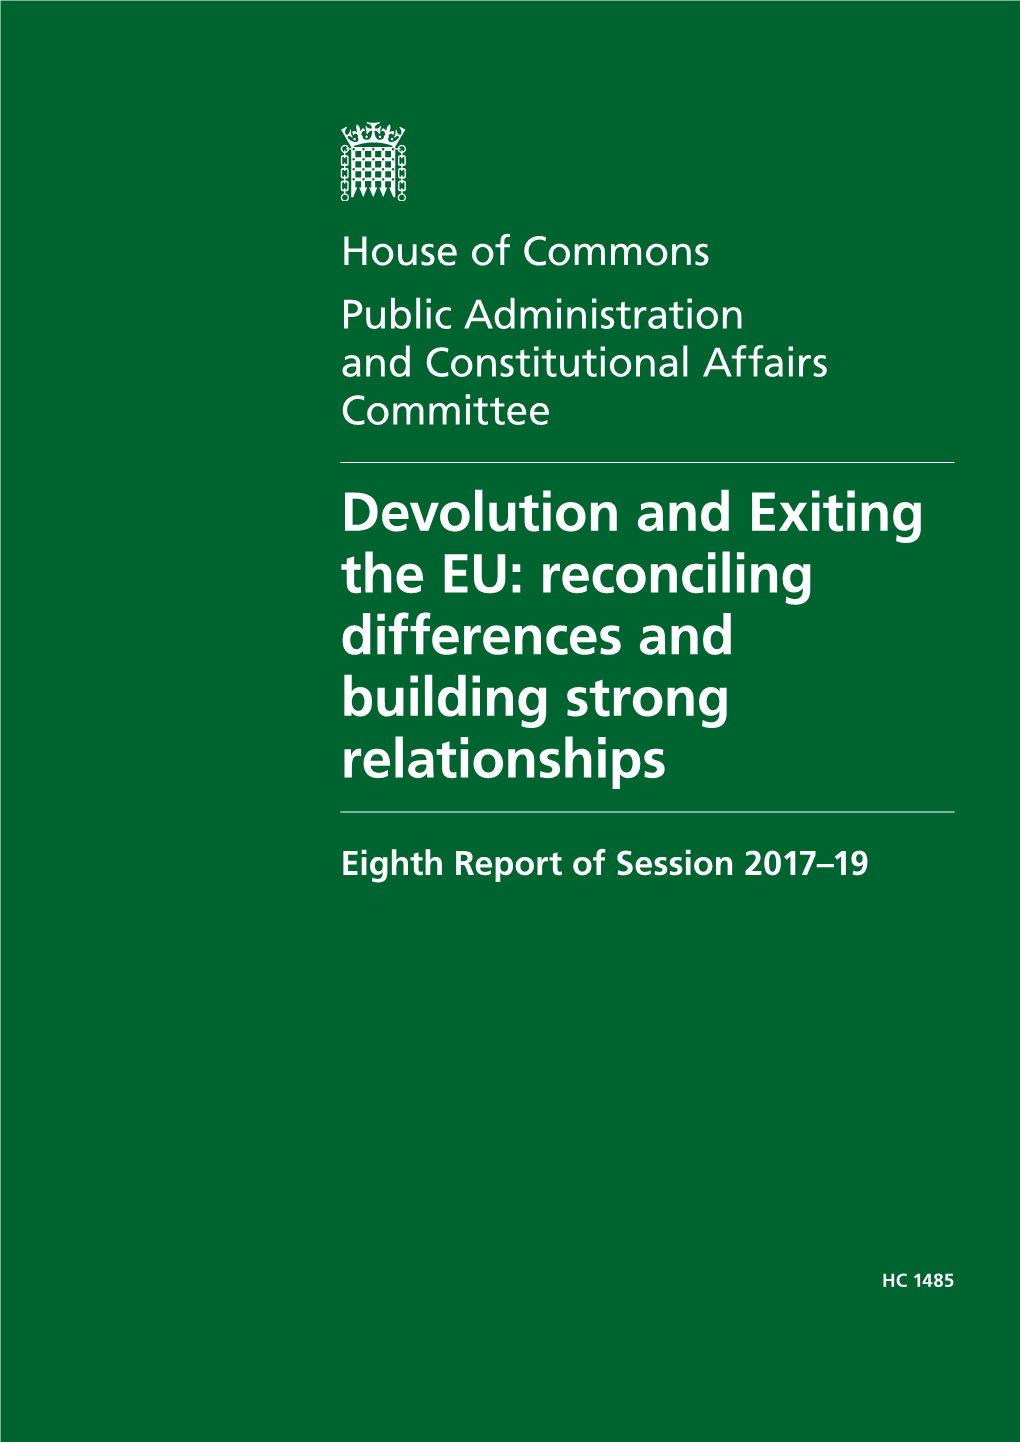 Devolution and Exiting the EU: Reconciling Differences and Building Strong Relationships